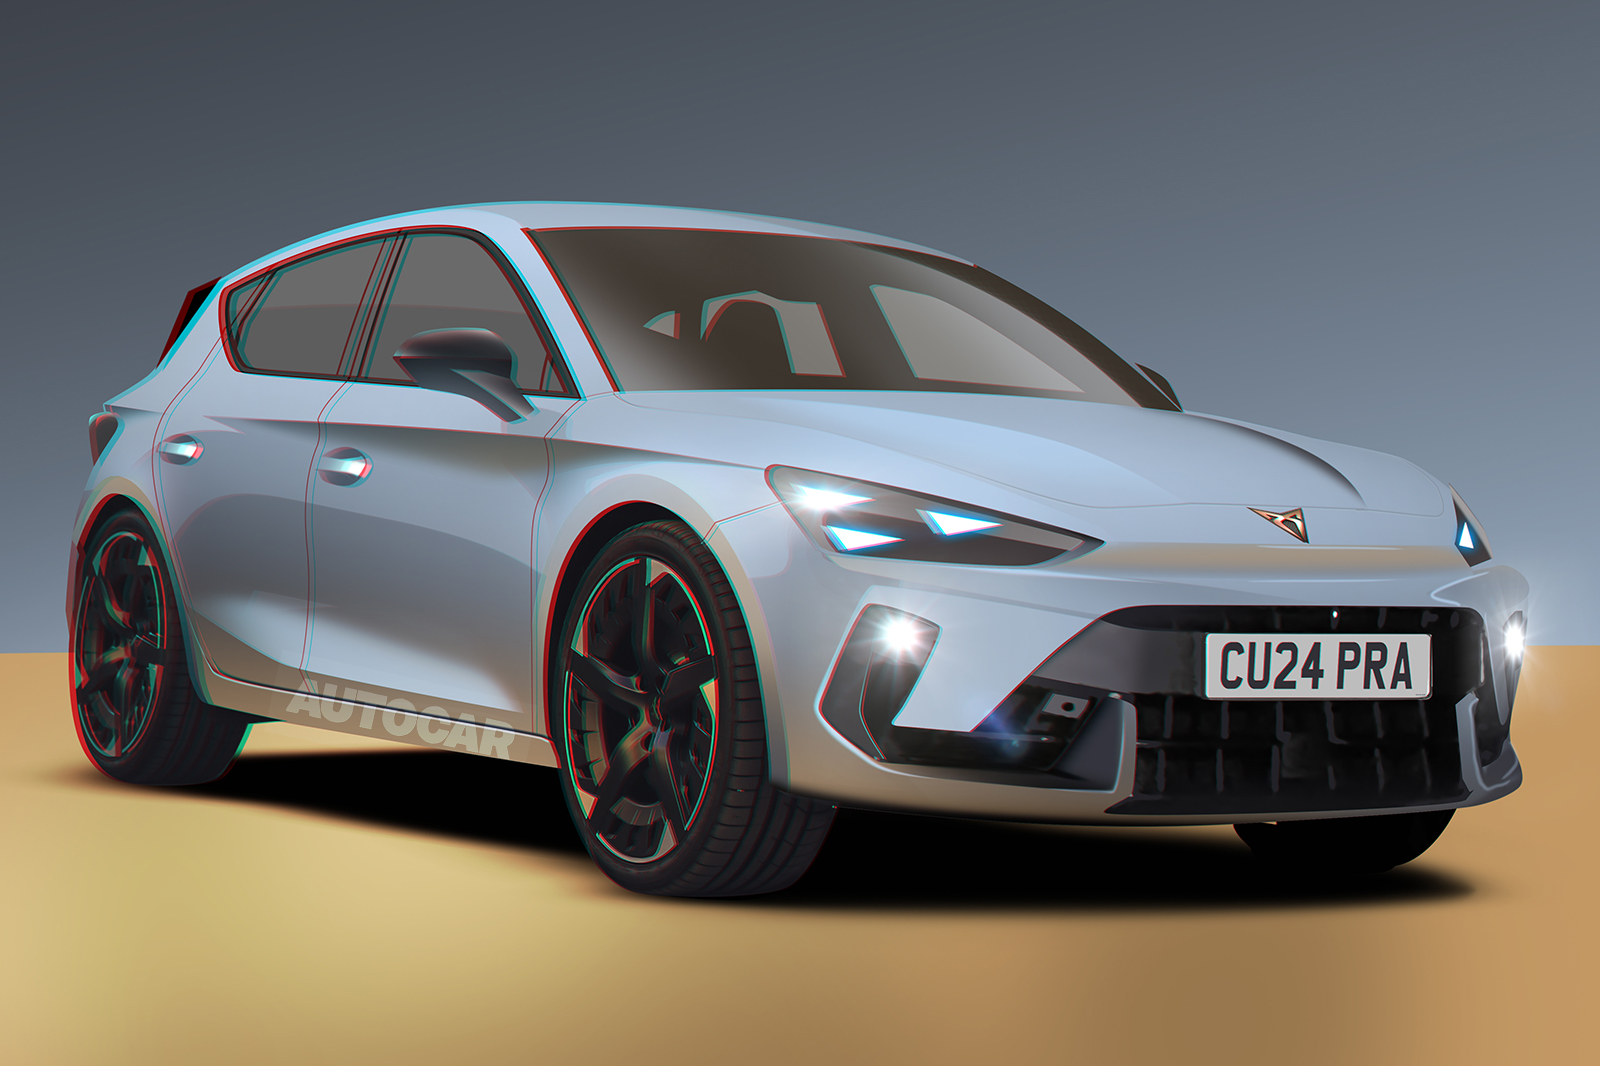 2024 Cupra Leon Almost Ready To Reveal Tavascan-Style Face